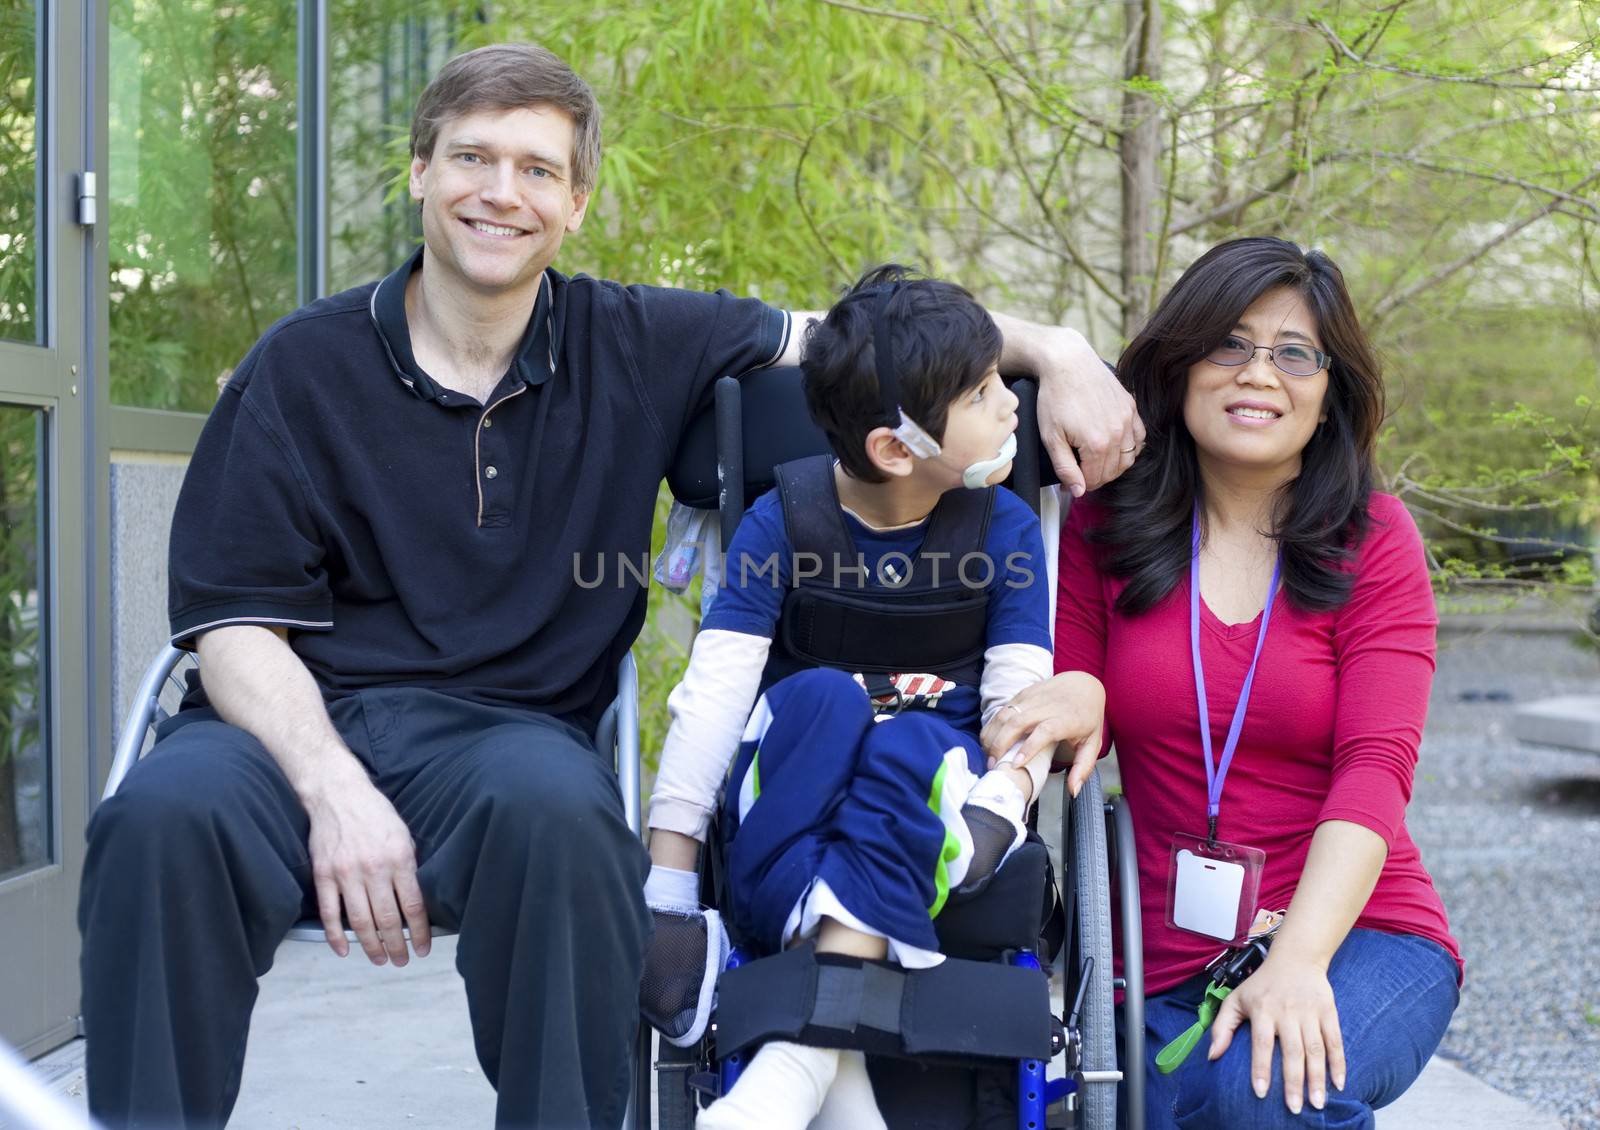 Disabled child in wheelchair with his parents by jarenwicklund